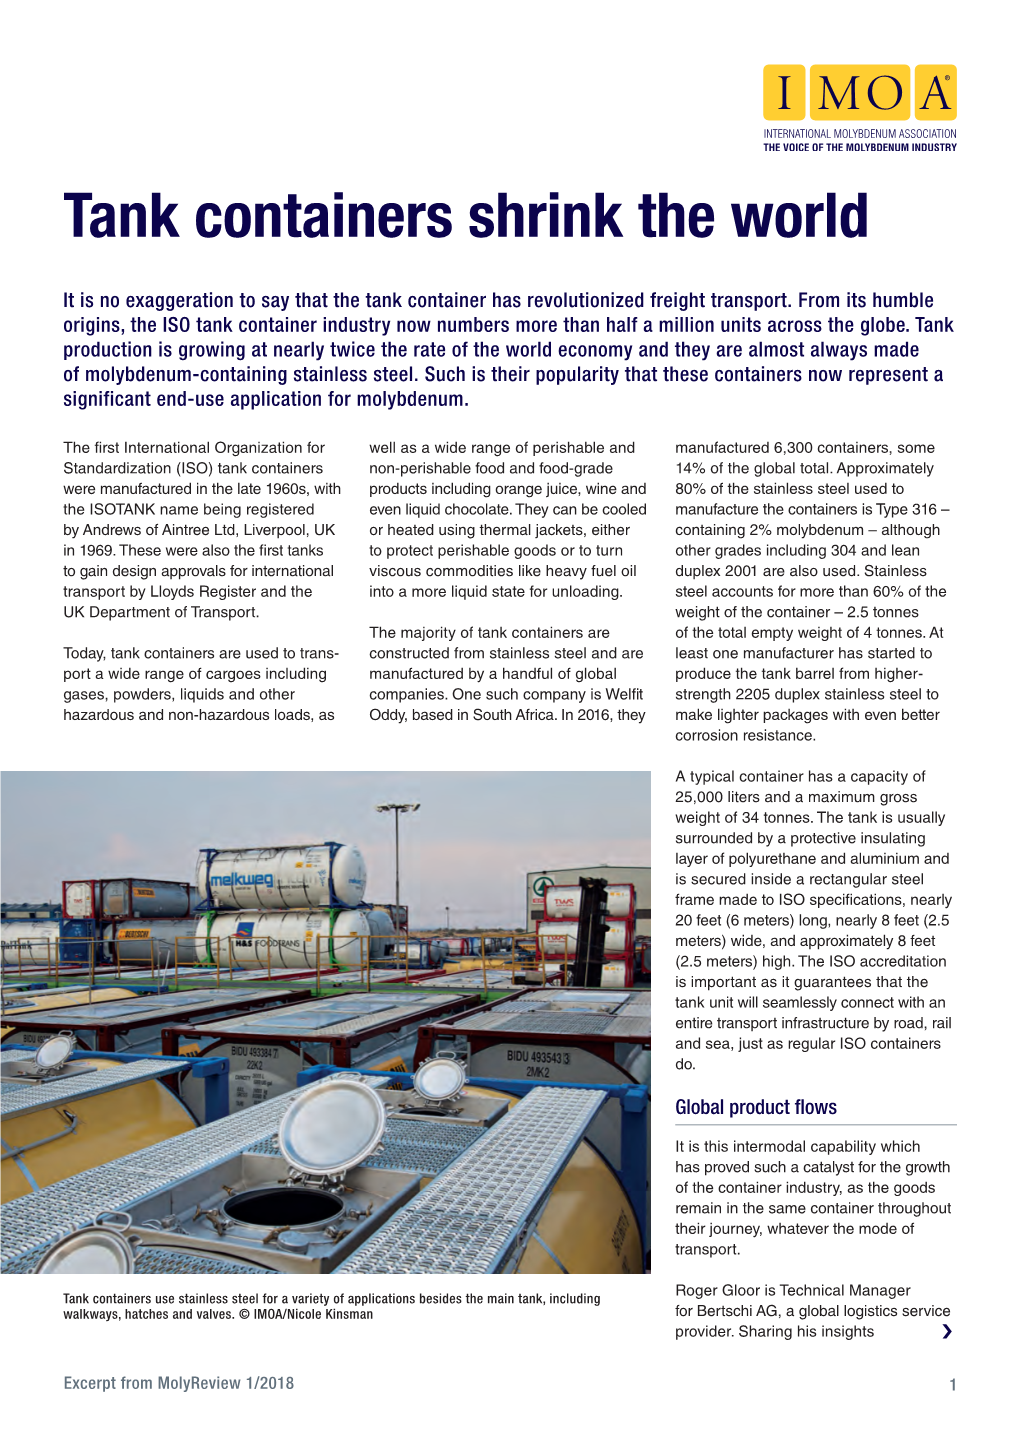 Tank Containers Shrink the World